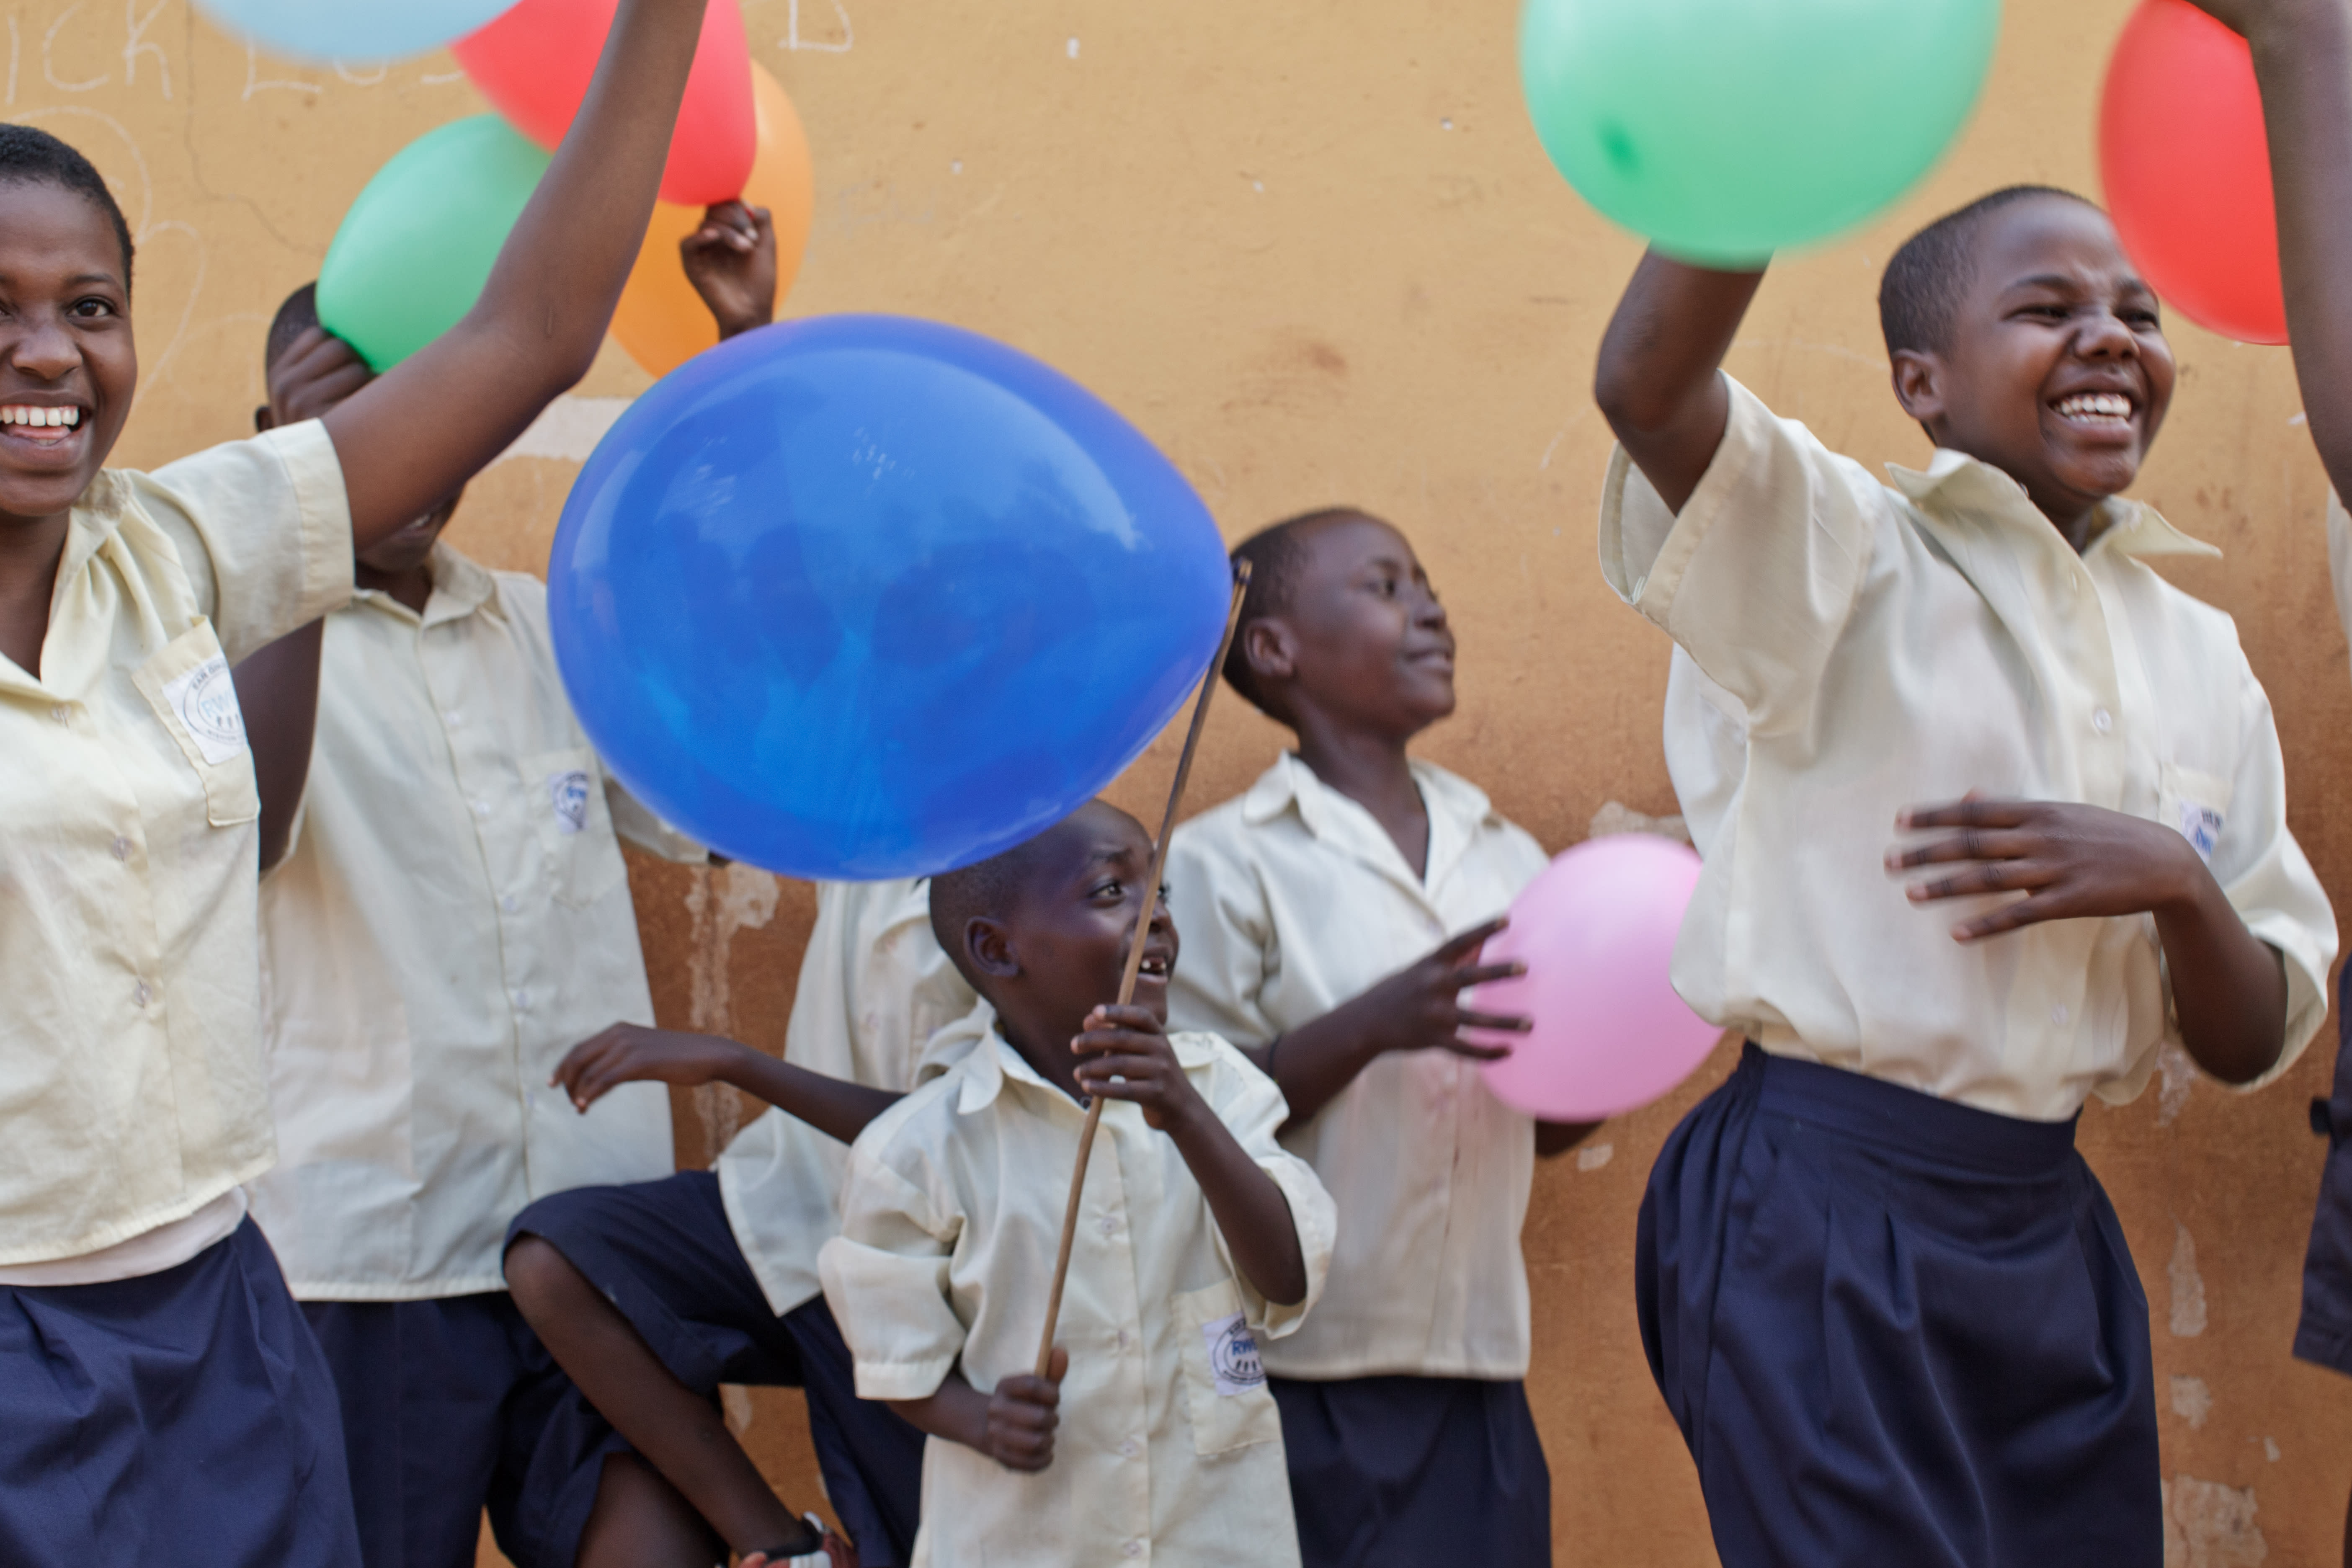 A group of children plays with multicolour balloons in Rwanda.